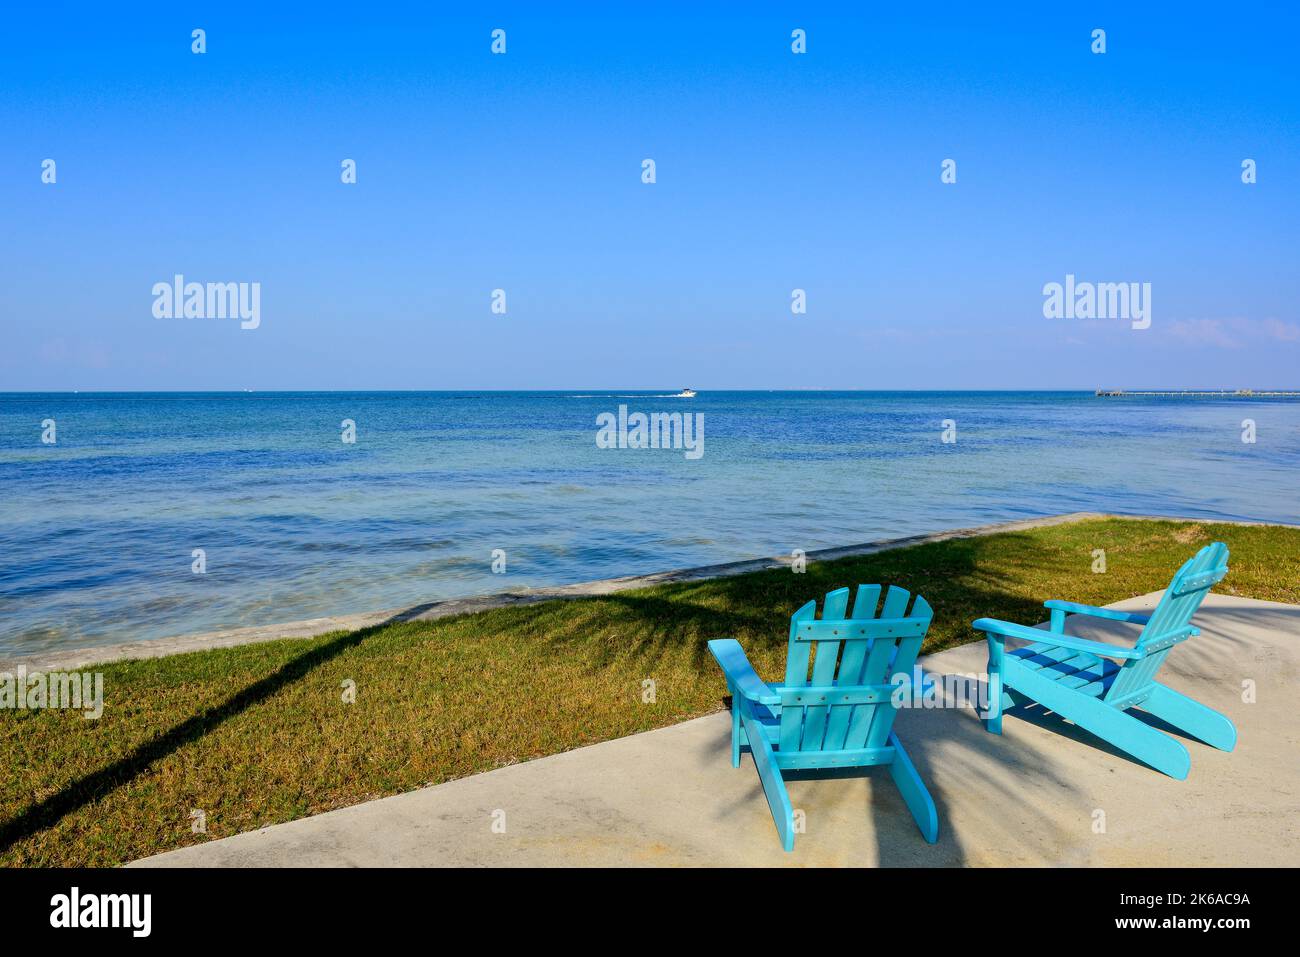 Rear view of turquoise blue Adirondack style chairs outside at waterfront  on Charlotte Harbor with wide view of blue sky & water, Bokeelia, FL Stock Photo